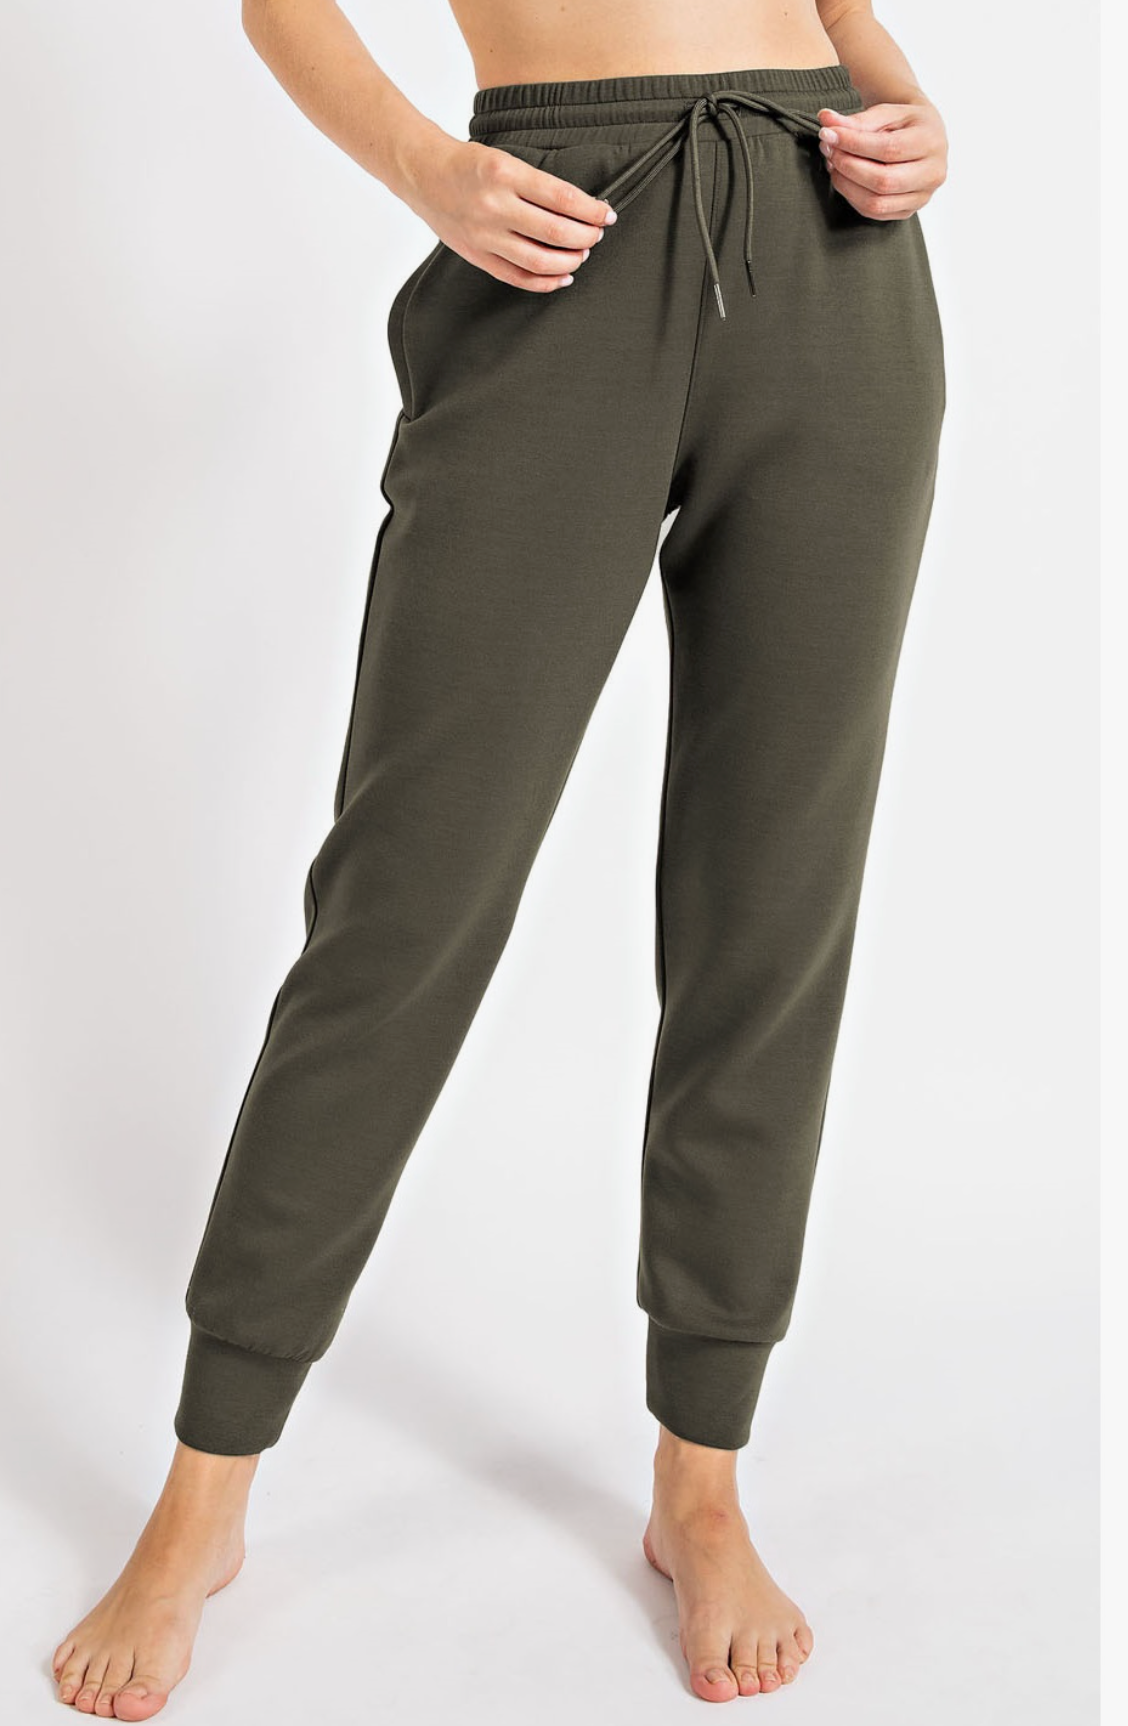 Reese Athletic Jogger Pants - OLIVE